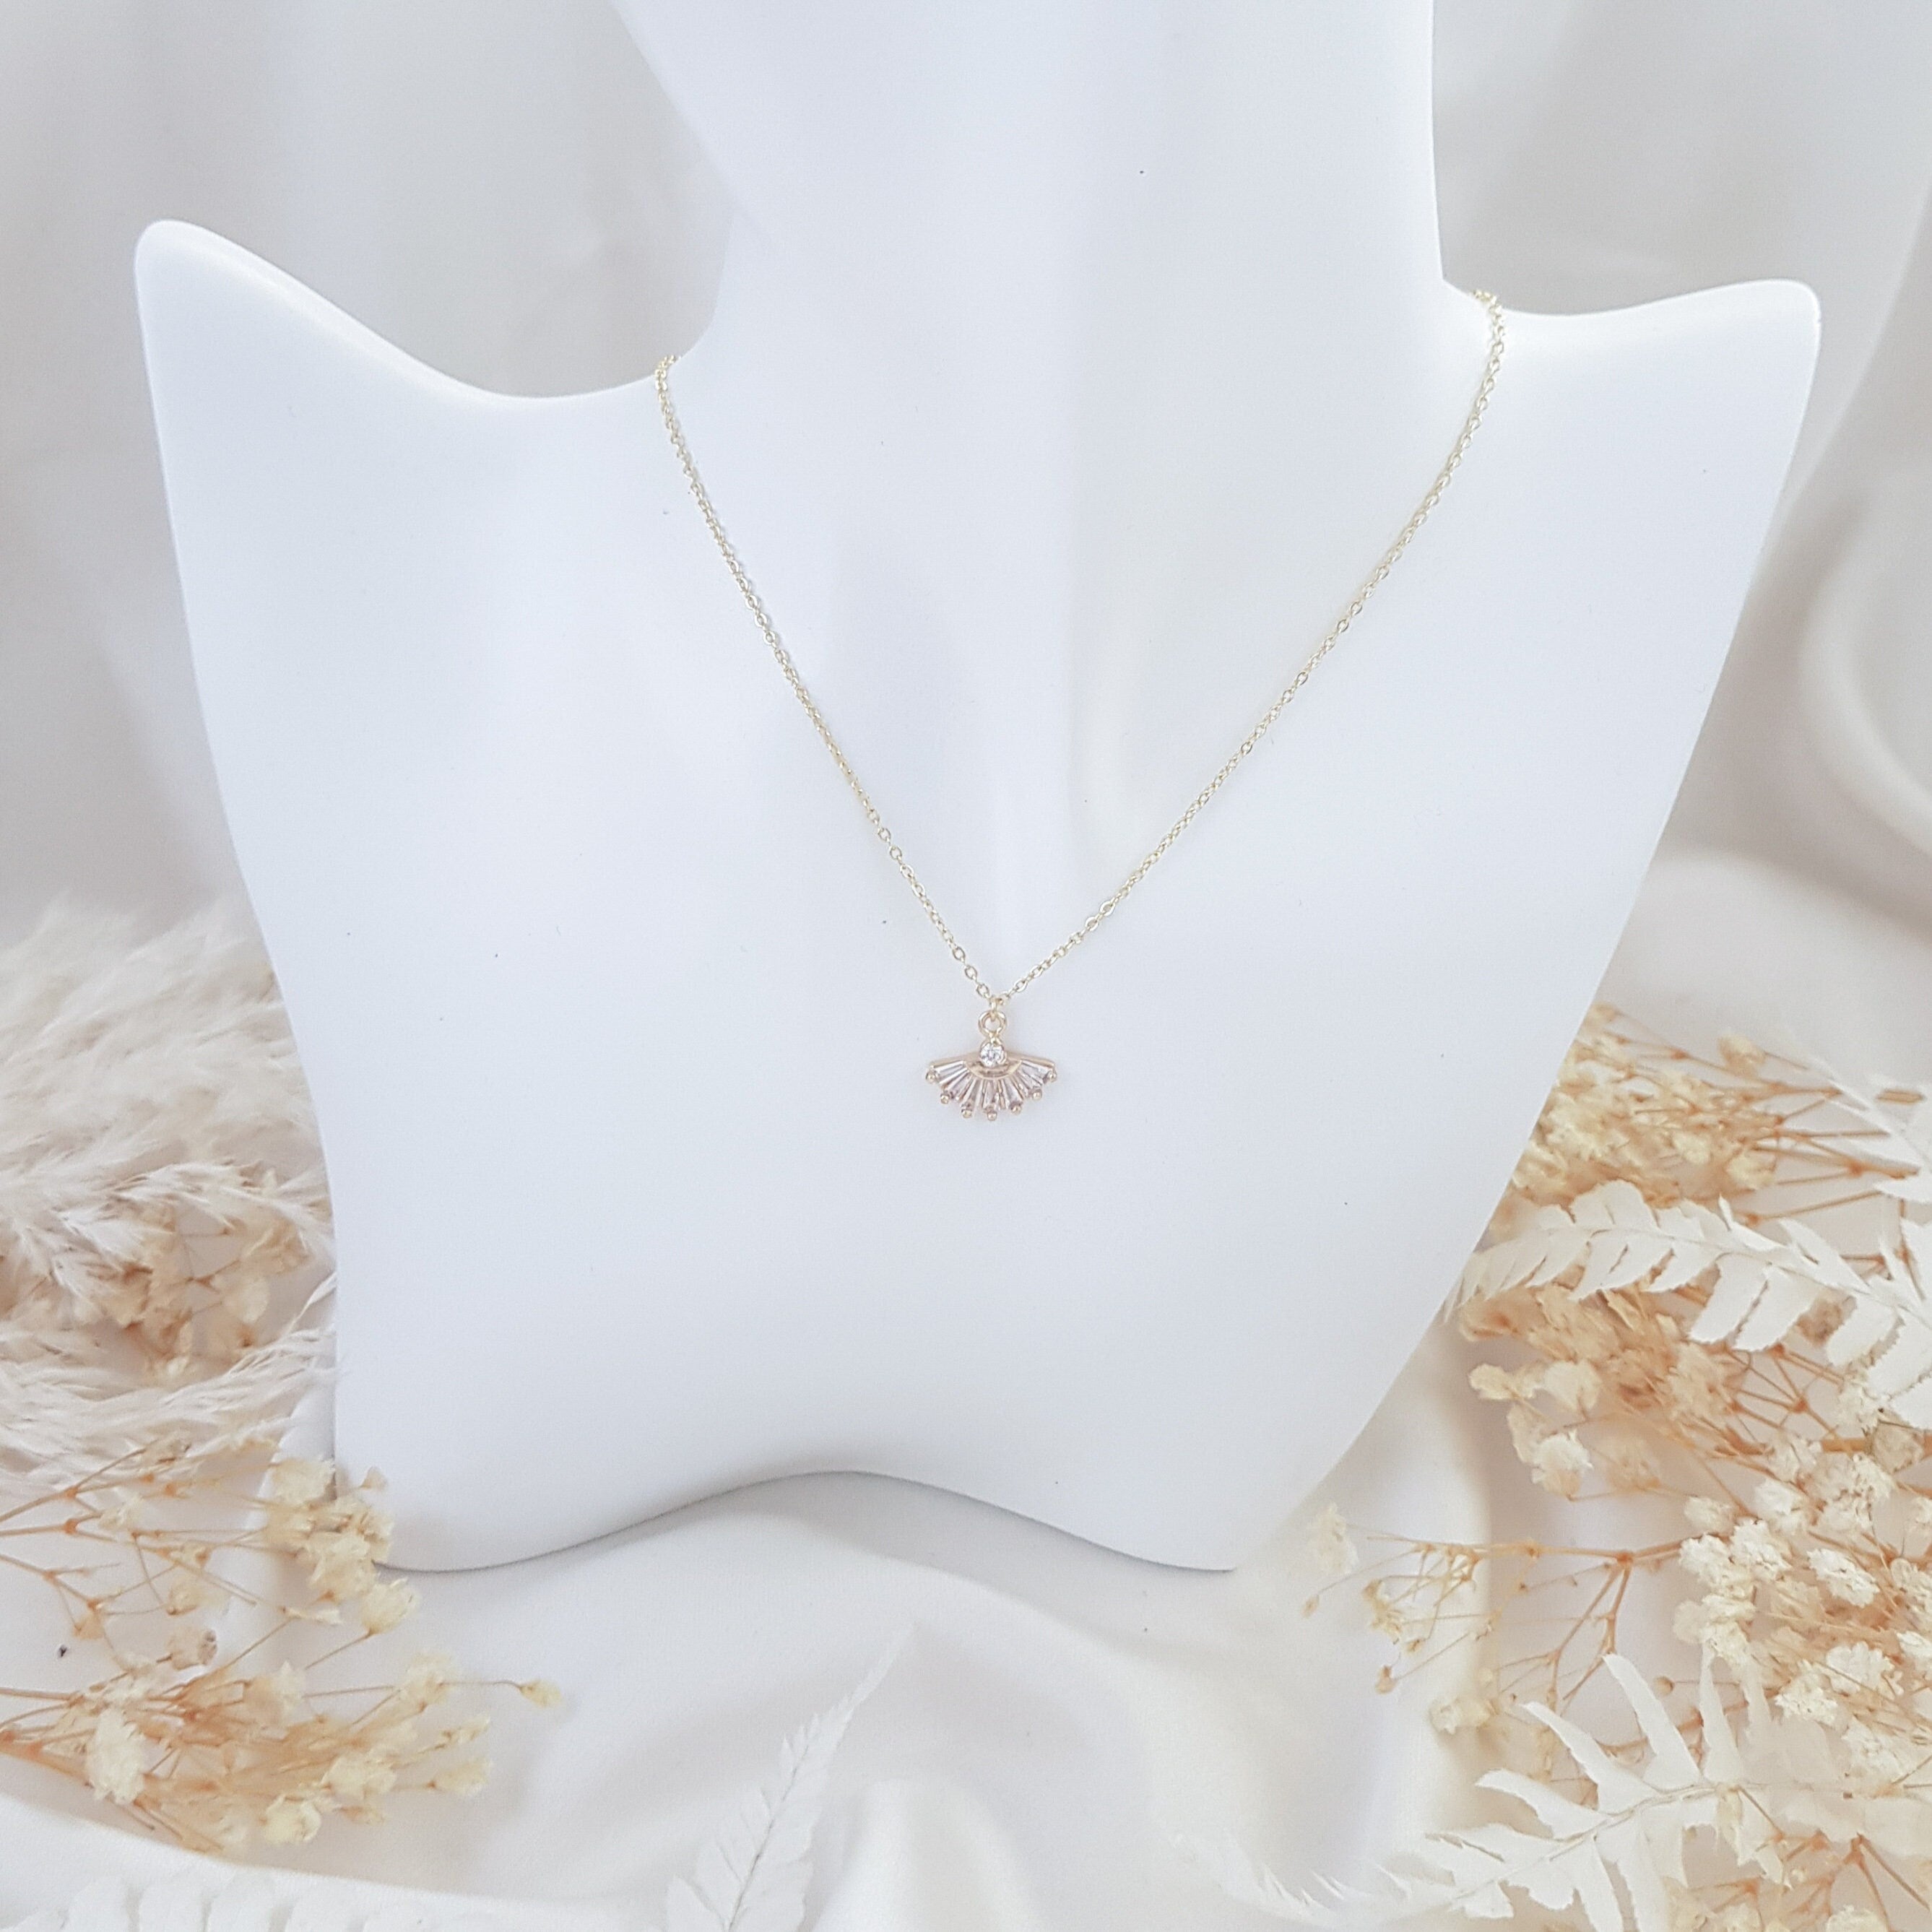 Bridal Necklace, Art Deco Necklace, Crystal Necklace, Gold Fan Necklace, Wedding Necklace, Bridesmaid Gift, Bridal Jewelry